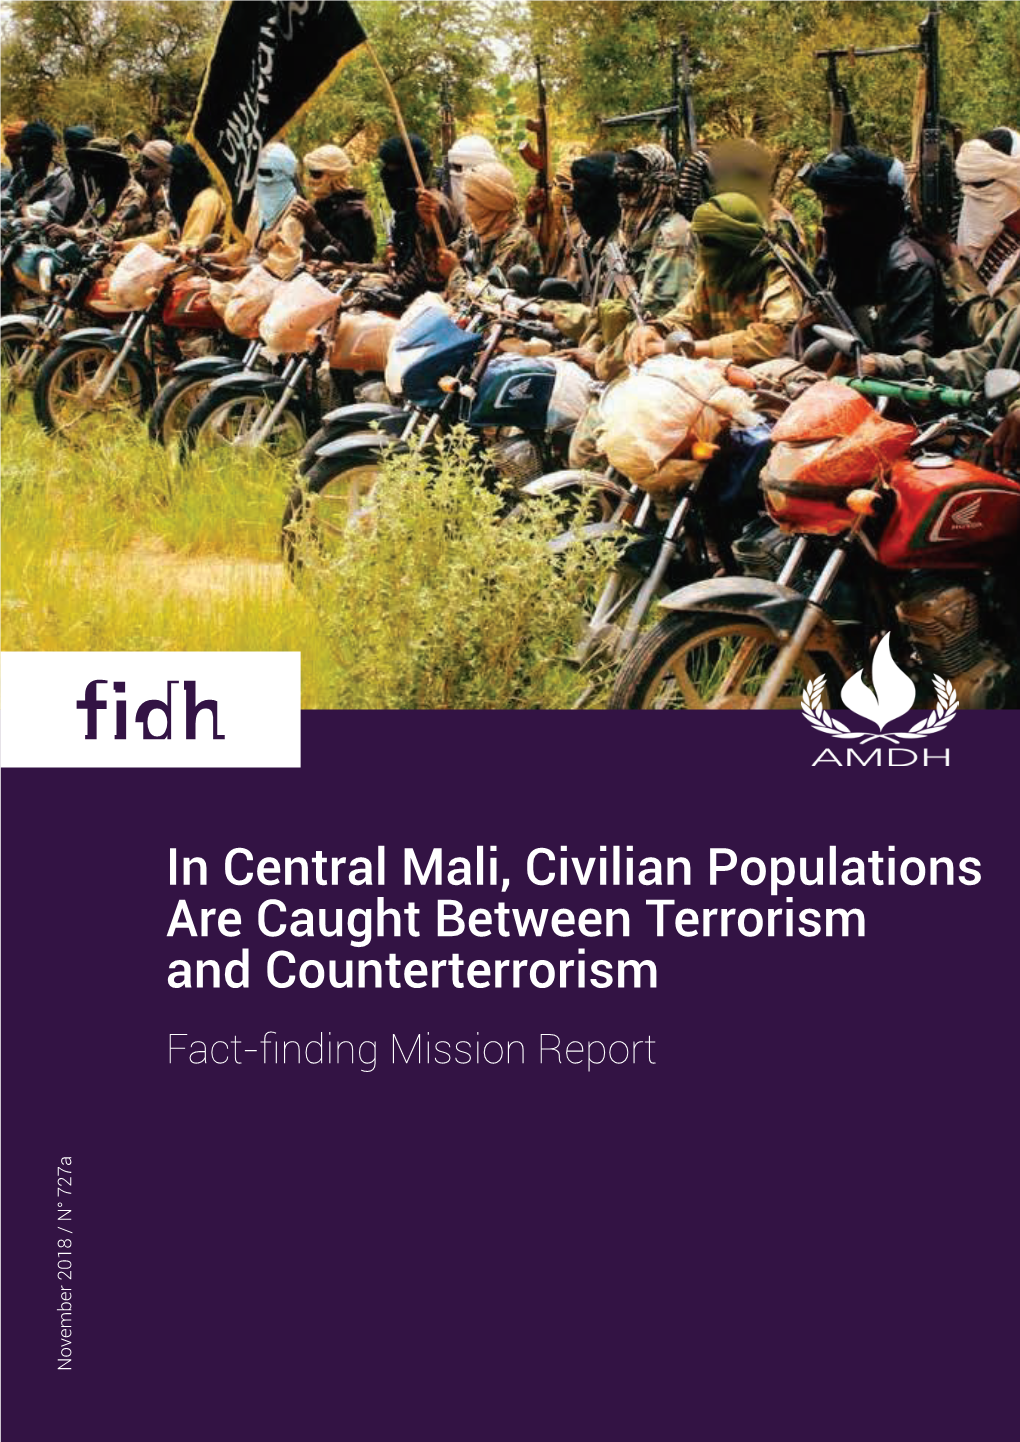 In Central Mali, Civilian Populations Are Caught Between Terrorism and Counterterrorism MAP of MALI